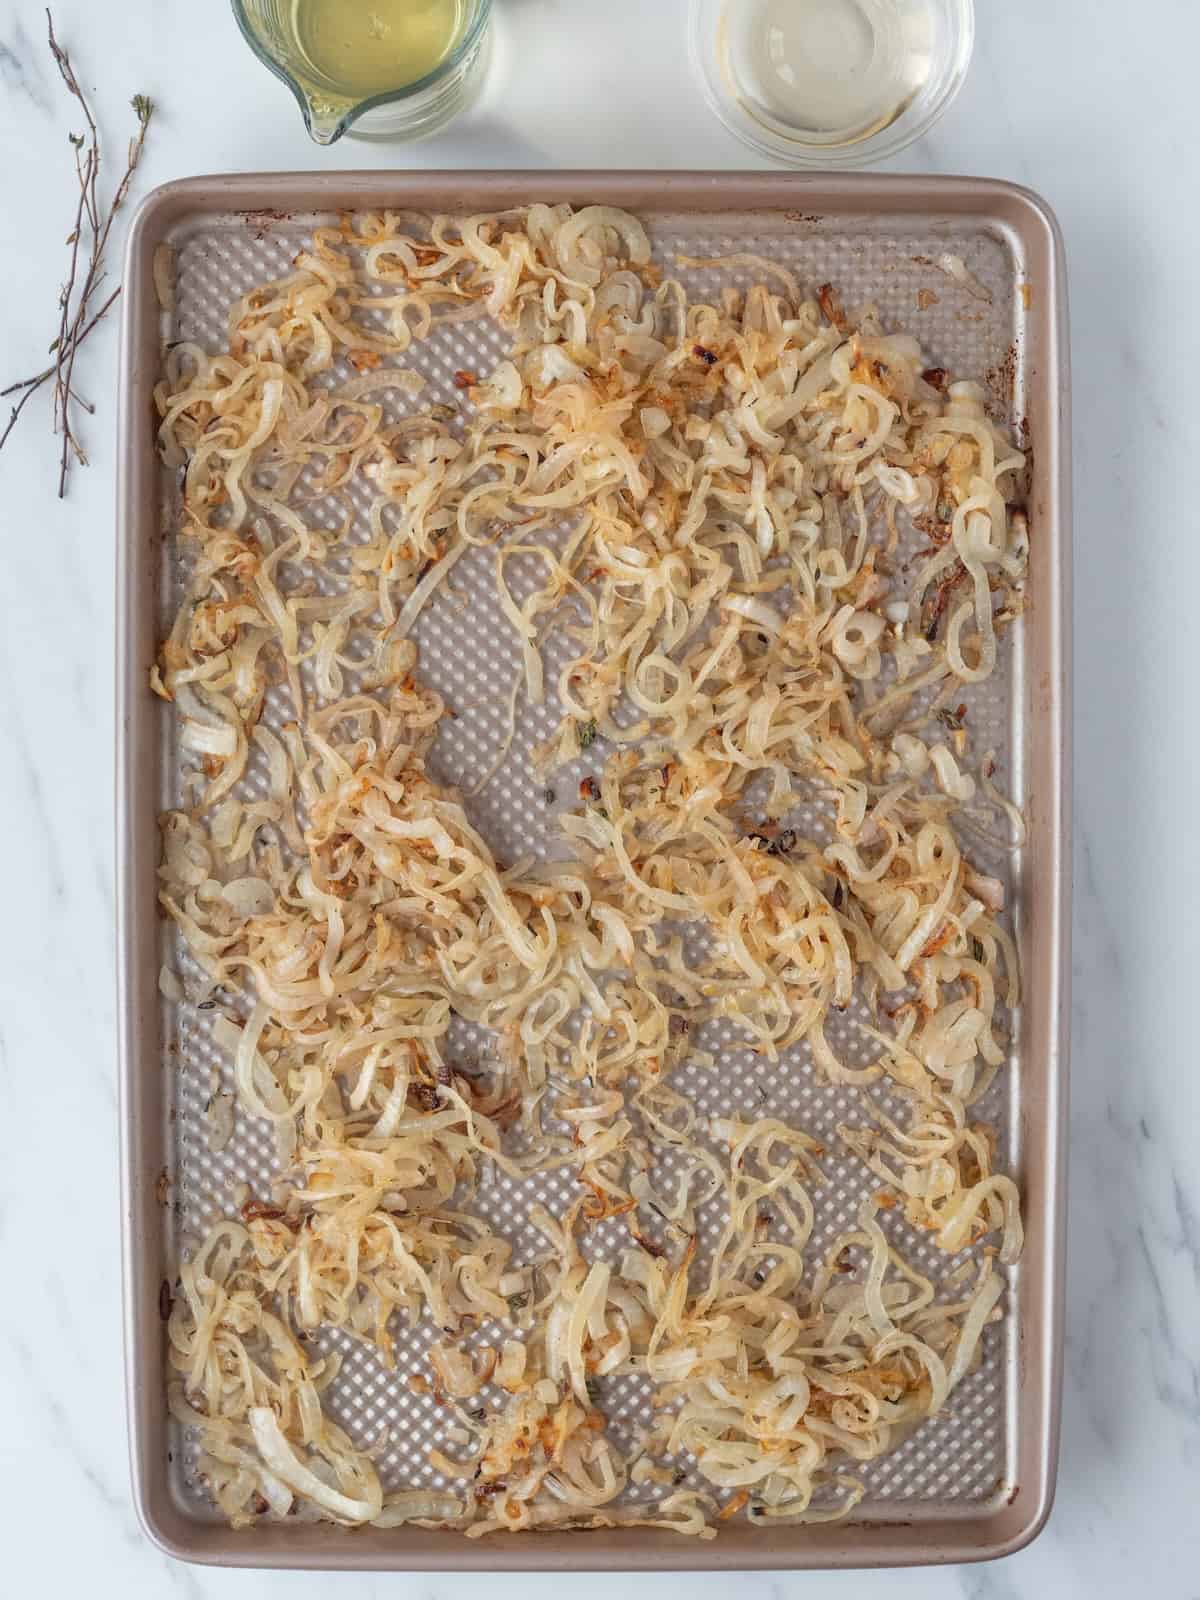 A baking sheet with partially roasted onions and shallots, and thyme sprigs removed from the sheet.